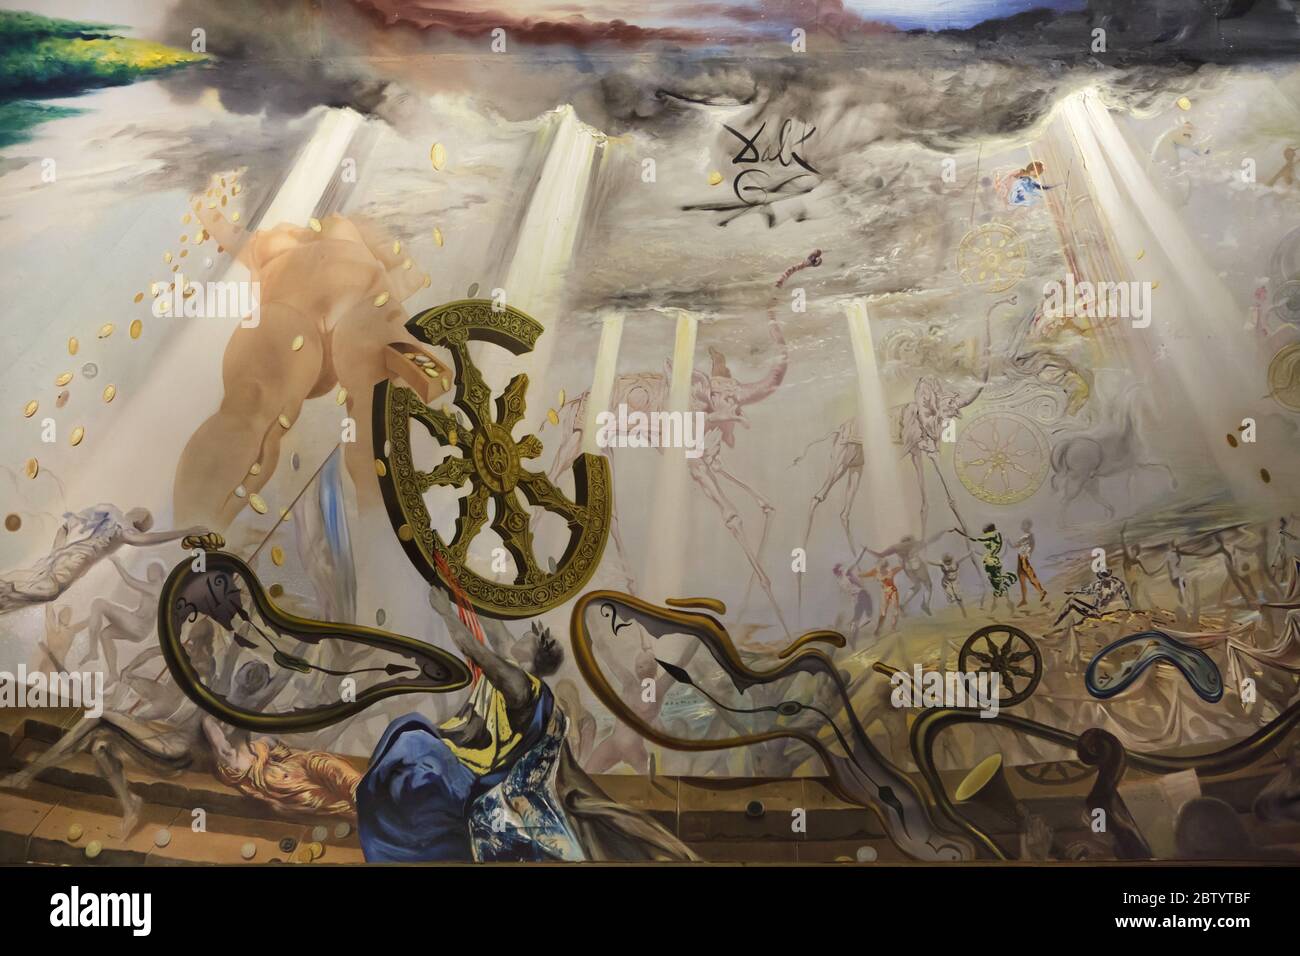 Detail of the ceiling painting by Spanish surrealist painter Salvador Dalí (1974) in the Palace of the Wind Room in the Salvador Dalí Theatre and Museum in Figueres, Catalonia, Spain. The signature of Salvador Dalí is seen in upper part of the detail. Stock Photo